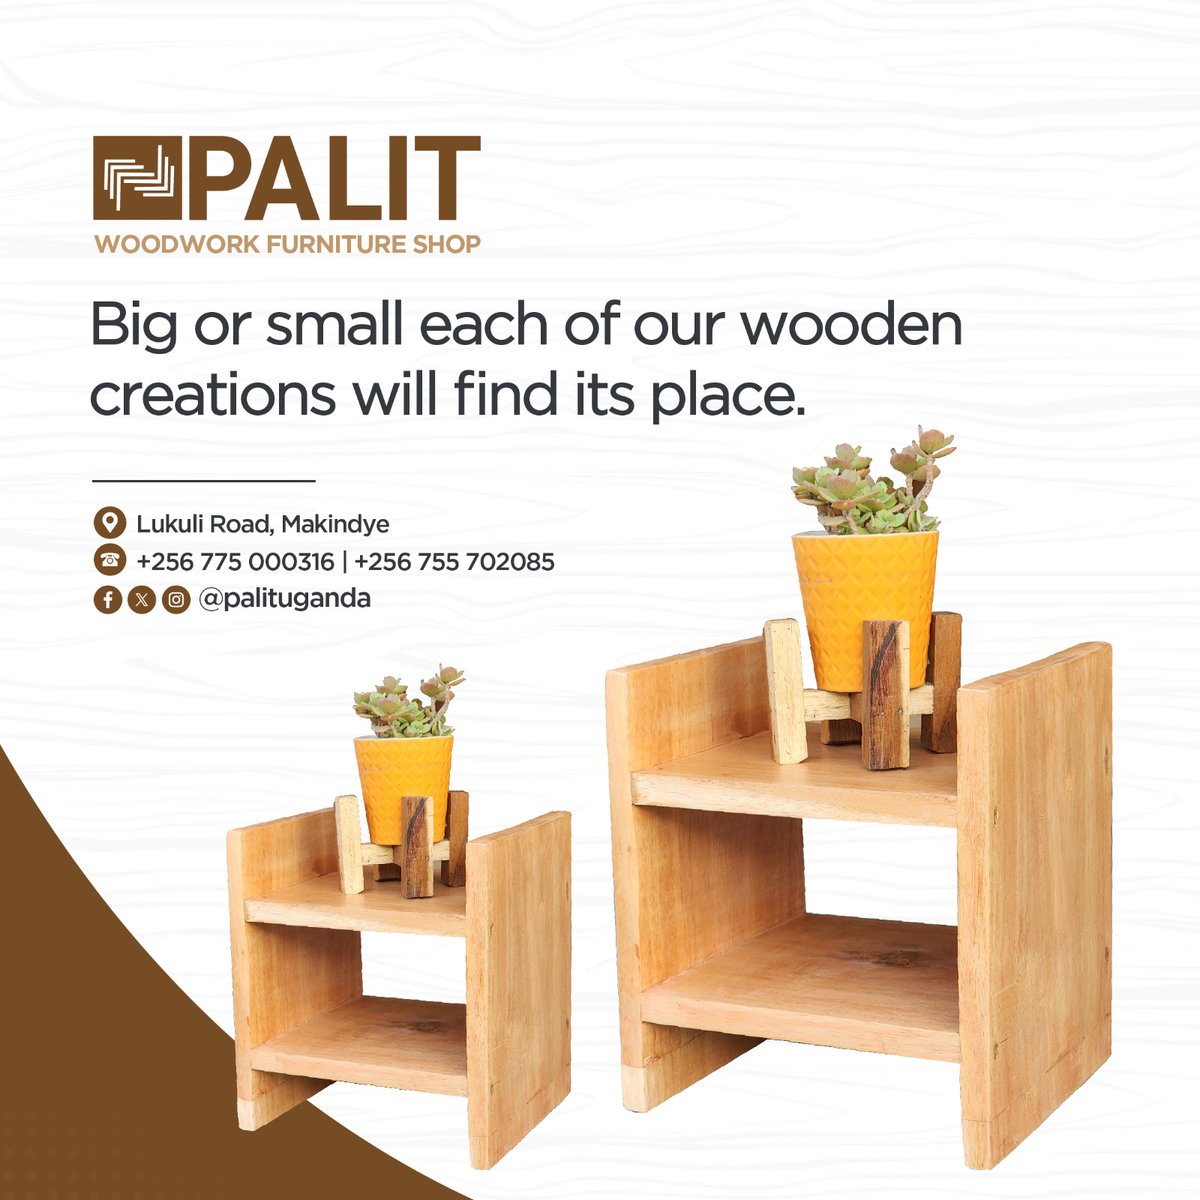 Every wooden creation will find its place, big or small! #Sidetable, #shelf or #potholder it is crafted with passion at the PALIT #WOODWORK #FURNITURE SHOP in Makindye on 0775000316 | 0755702085 ! 🛠️🪵  #woodenfurniture #woodendecor #woodenaccessories